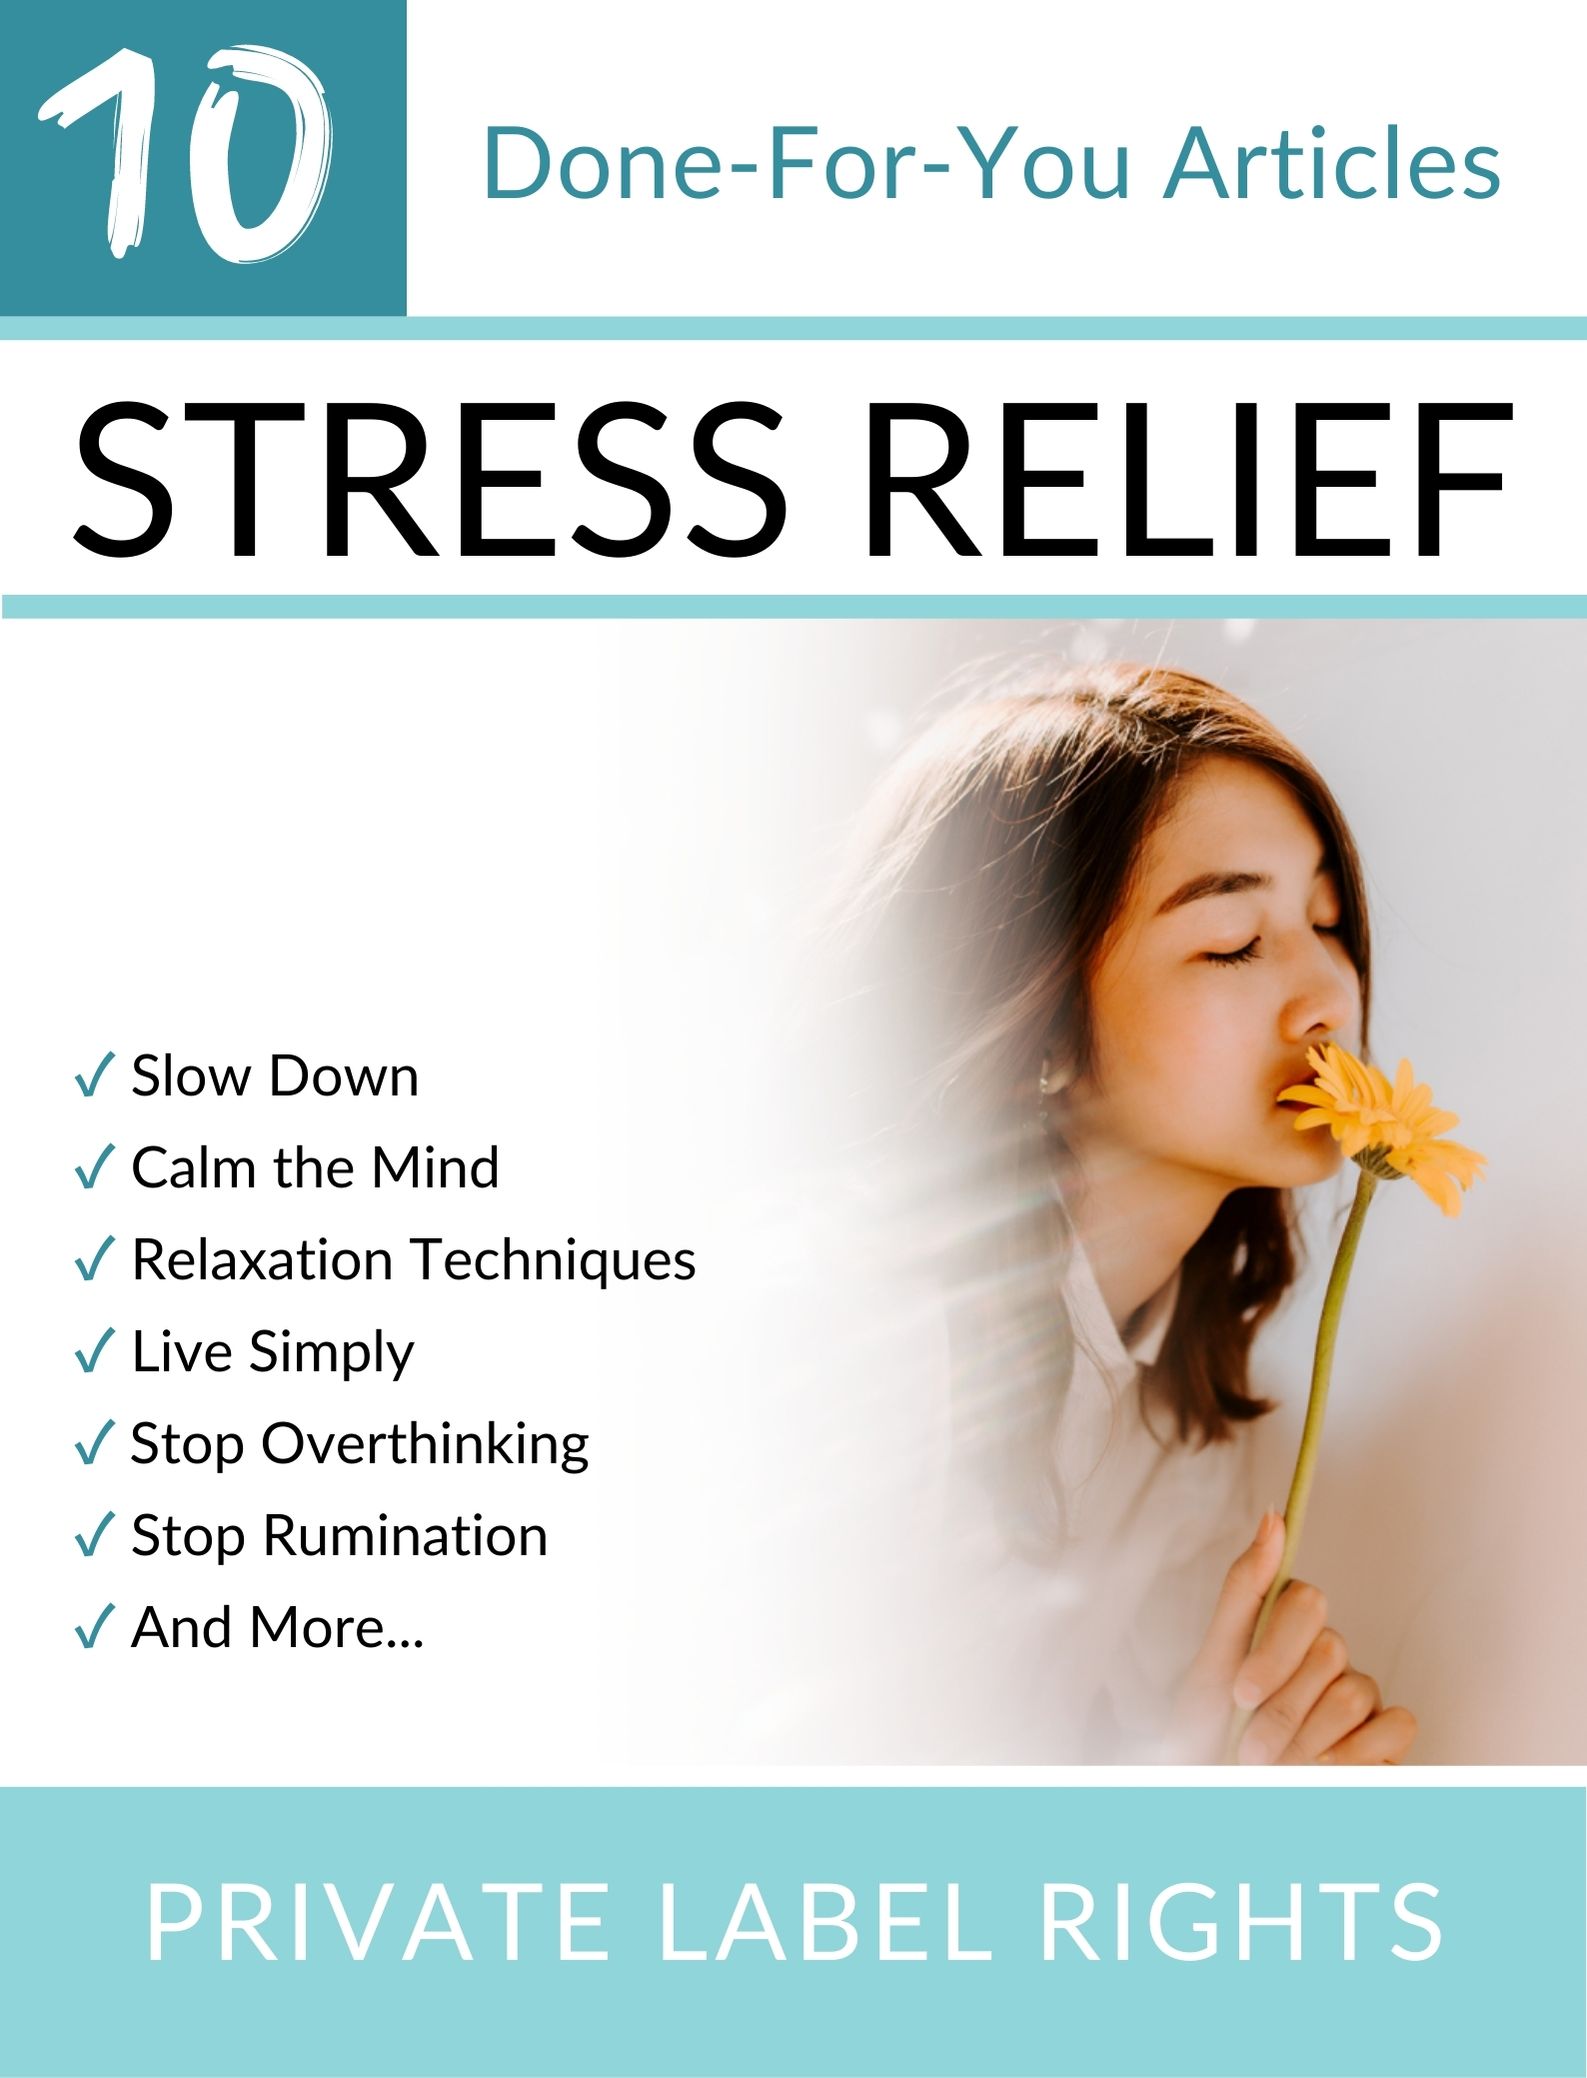 Stress Relief Article Package